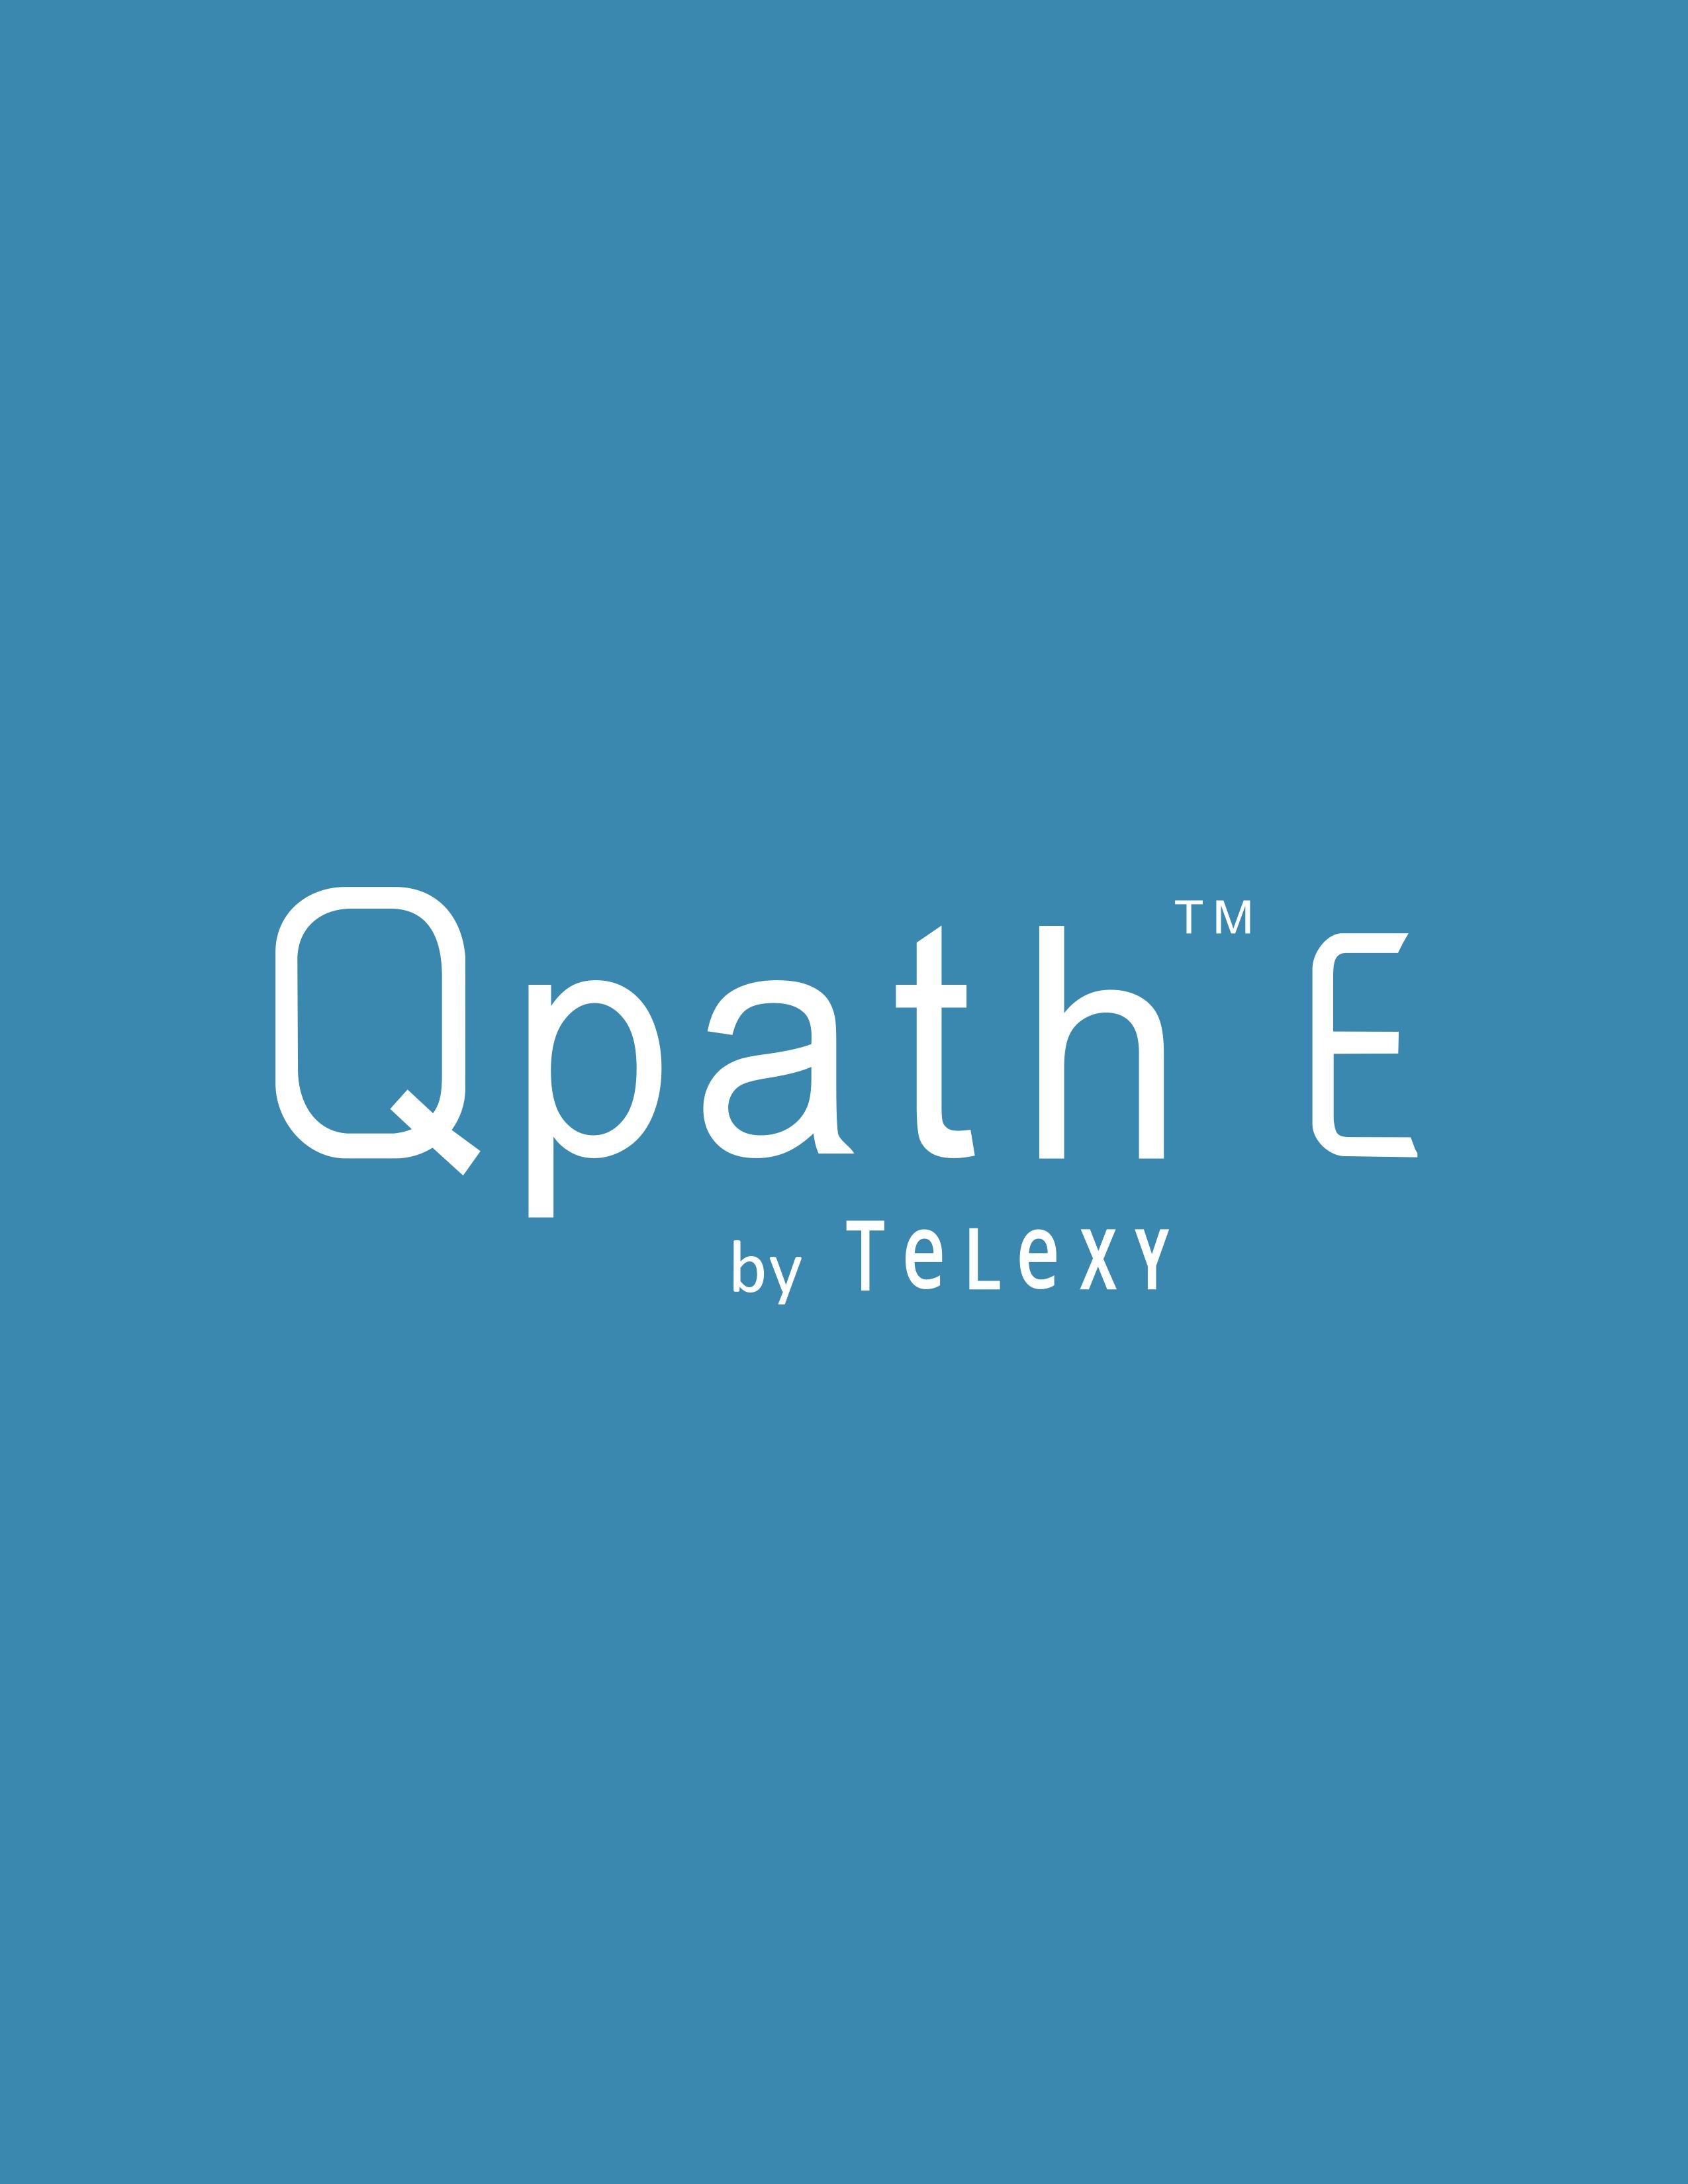 The web-based application that allows users to transfer ultrasound images or clips from their machines to the application for Quality Assurance.
#QpathE
#Telexy